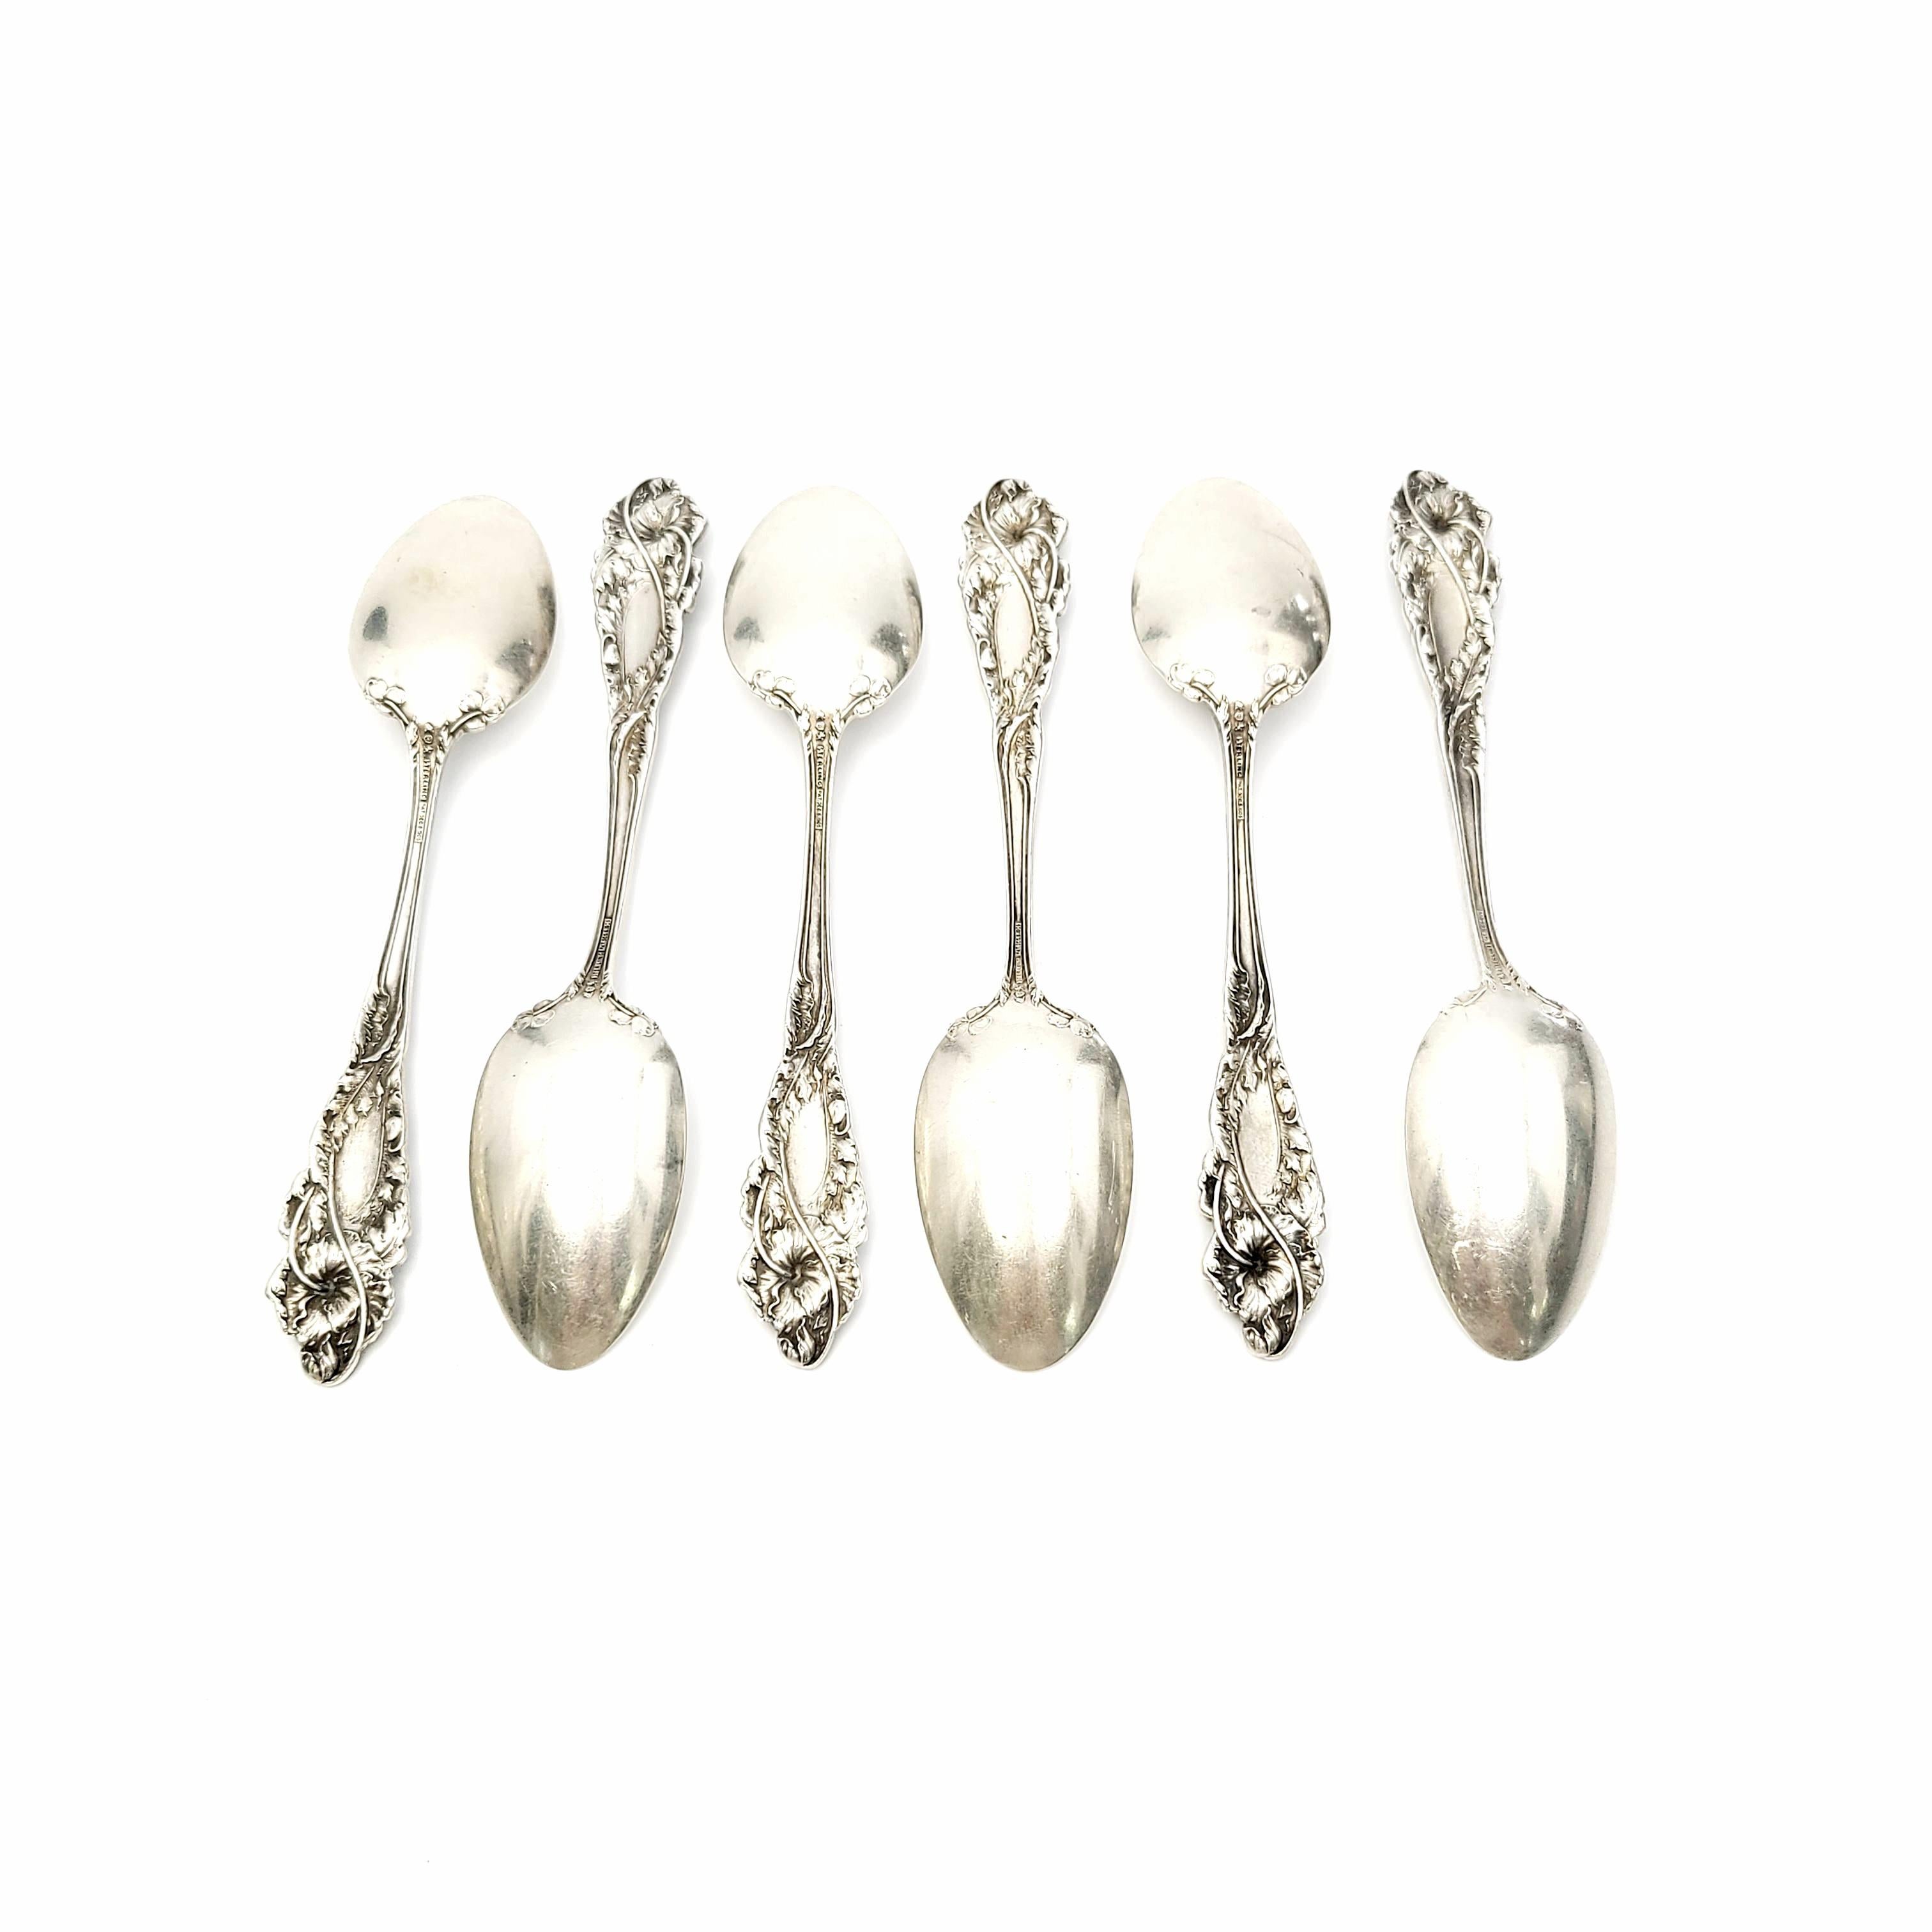 Set of 6 antique sterling silver youth spoons by Reed & Barton in the love disarmed pattern.

No monogram.

Reed & Barton's love disarmed pattern is a highly sought out and collectible pattern issued 1899-1928 designed by Charles A Bennett.